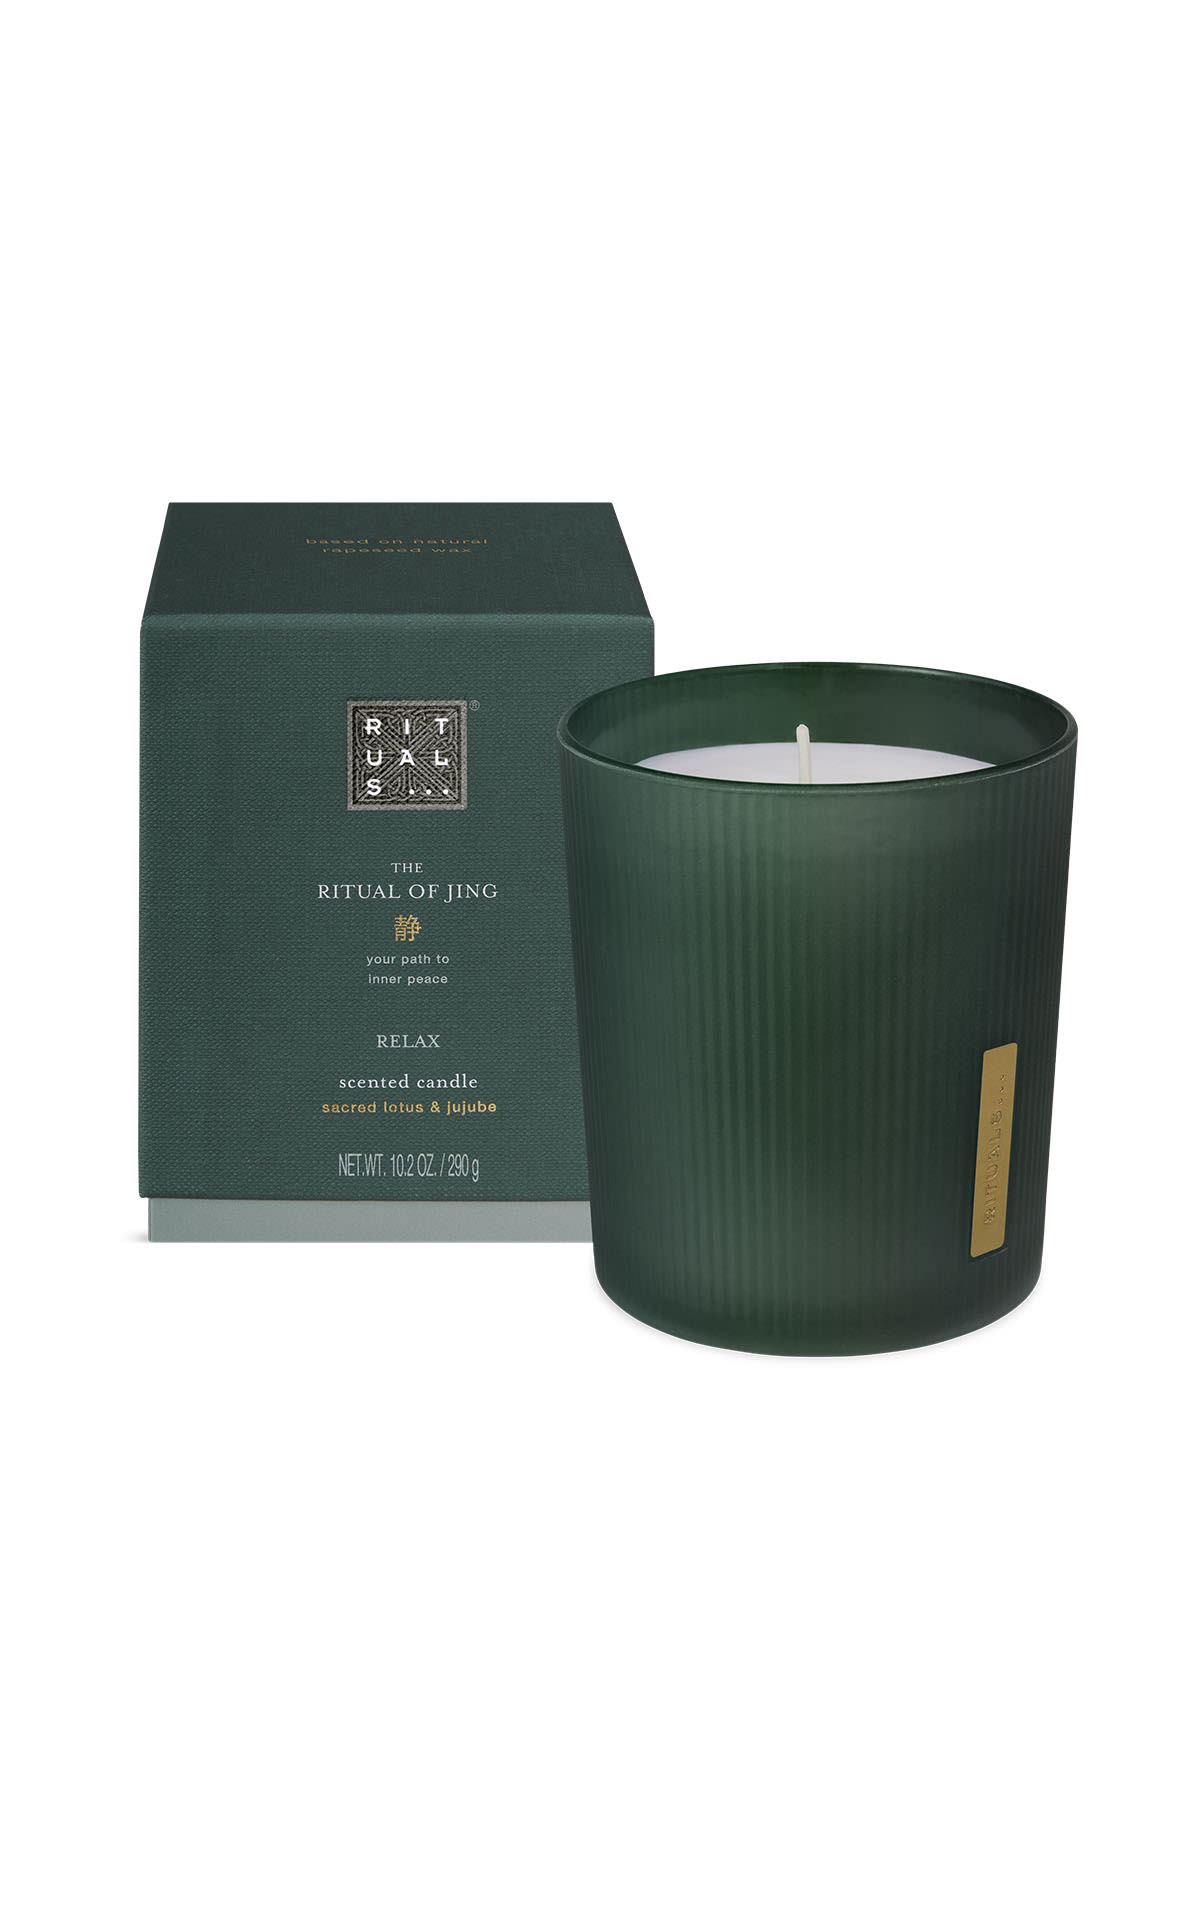 Rituals The ritual of jing scented candle from Bicester Village